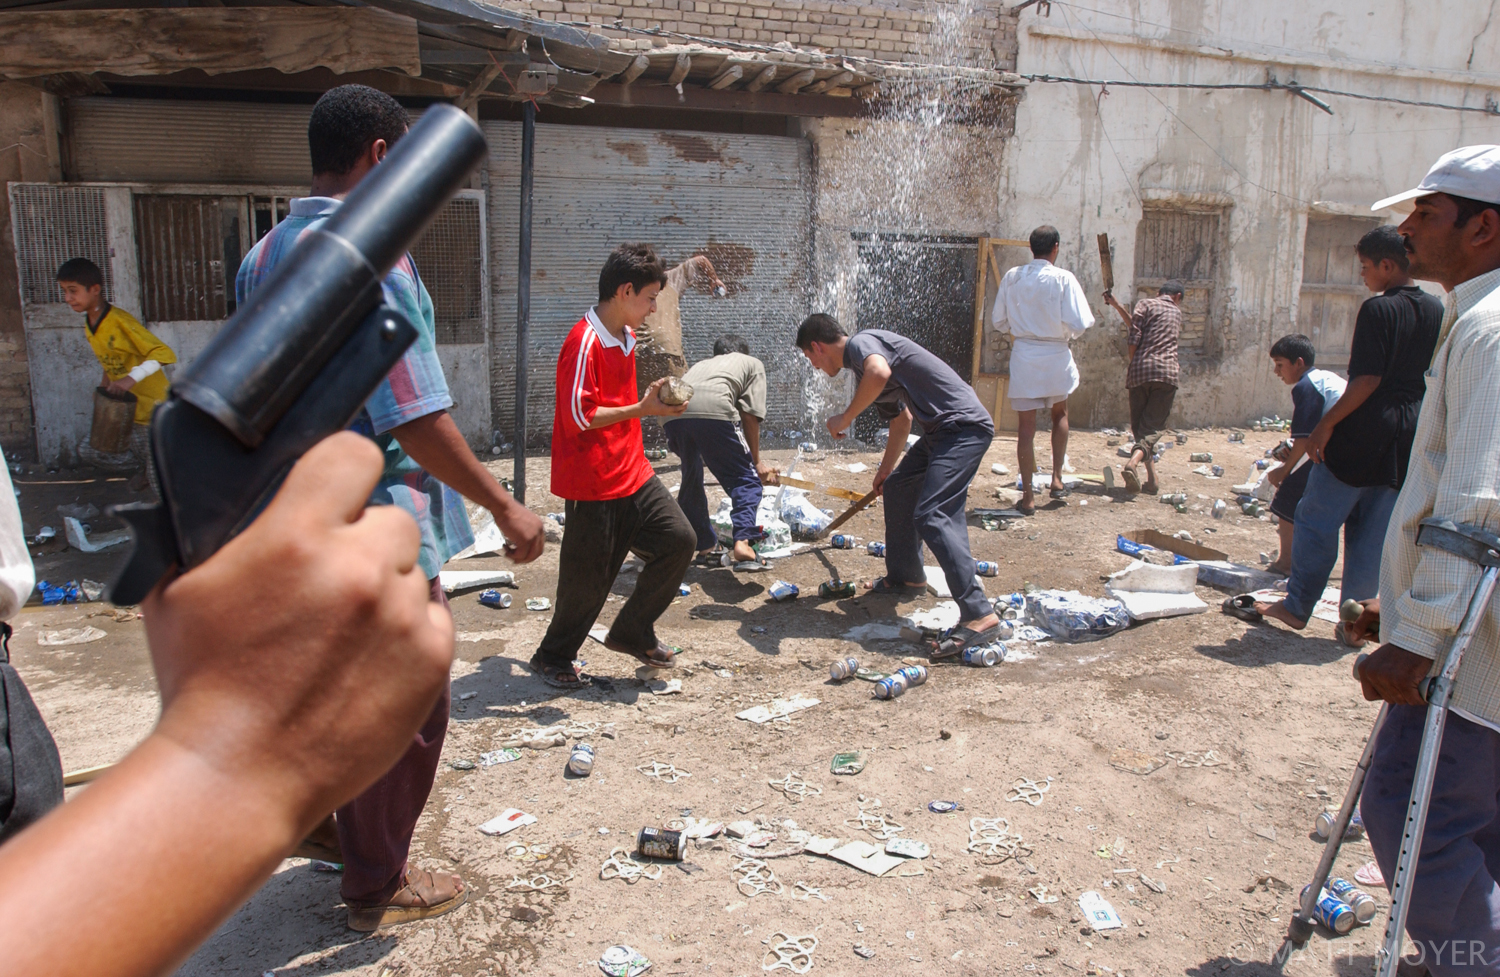  Members of a mob attack a brothel and destroy cases of beer found inside in the Old Basra neighborhood of Basra, Iraq.  The mob, made up of men and boys from the neighborhood and a few Islamists, threw stones at the prostitutes as they ran for their